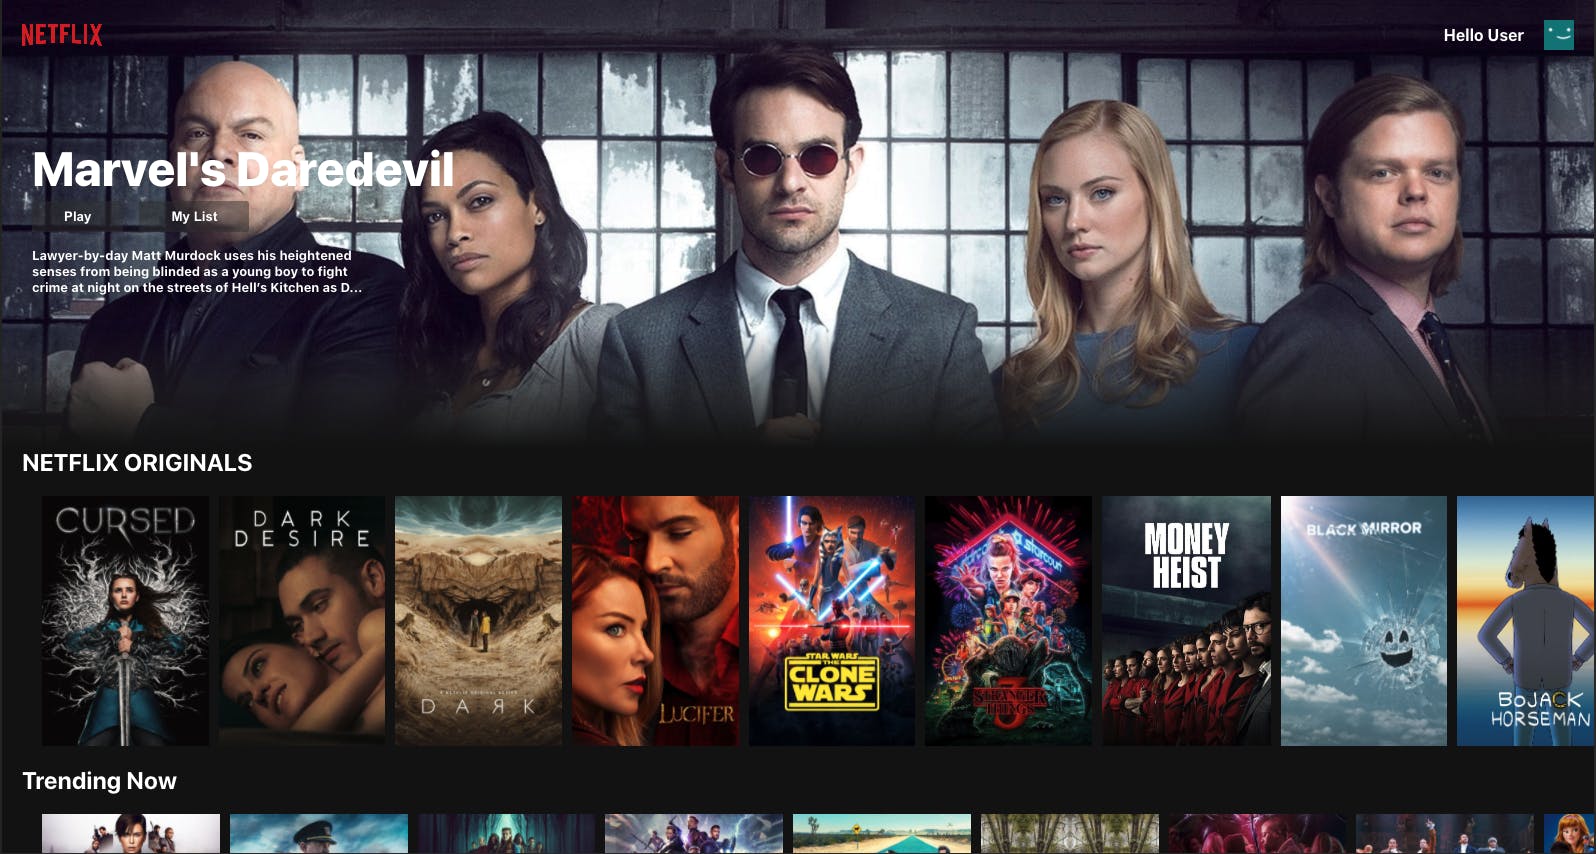 Netflix clone homepage showing a spotlight movie along with horizontal lists of categorized movies and shows